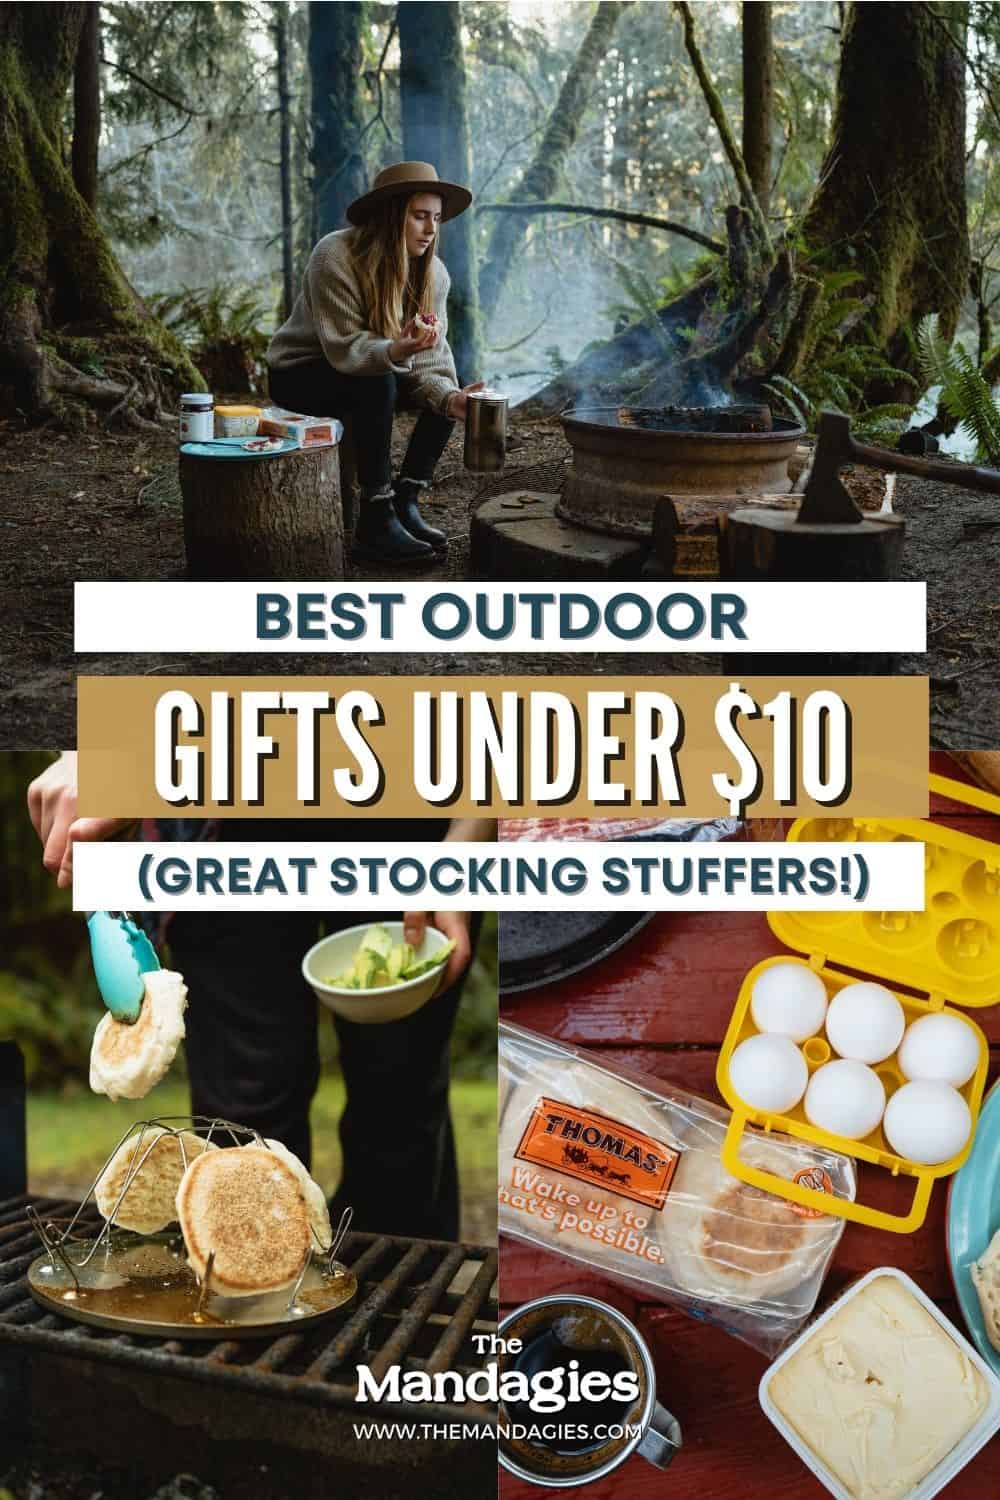 10 Stocking Stuffers Under $10 That Every Dude Would Dig